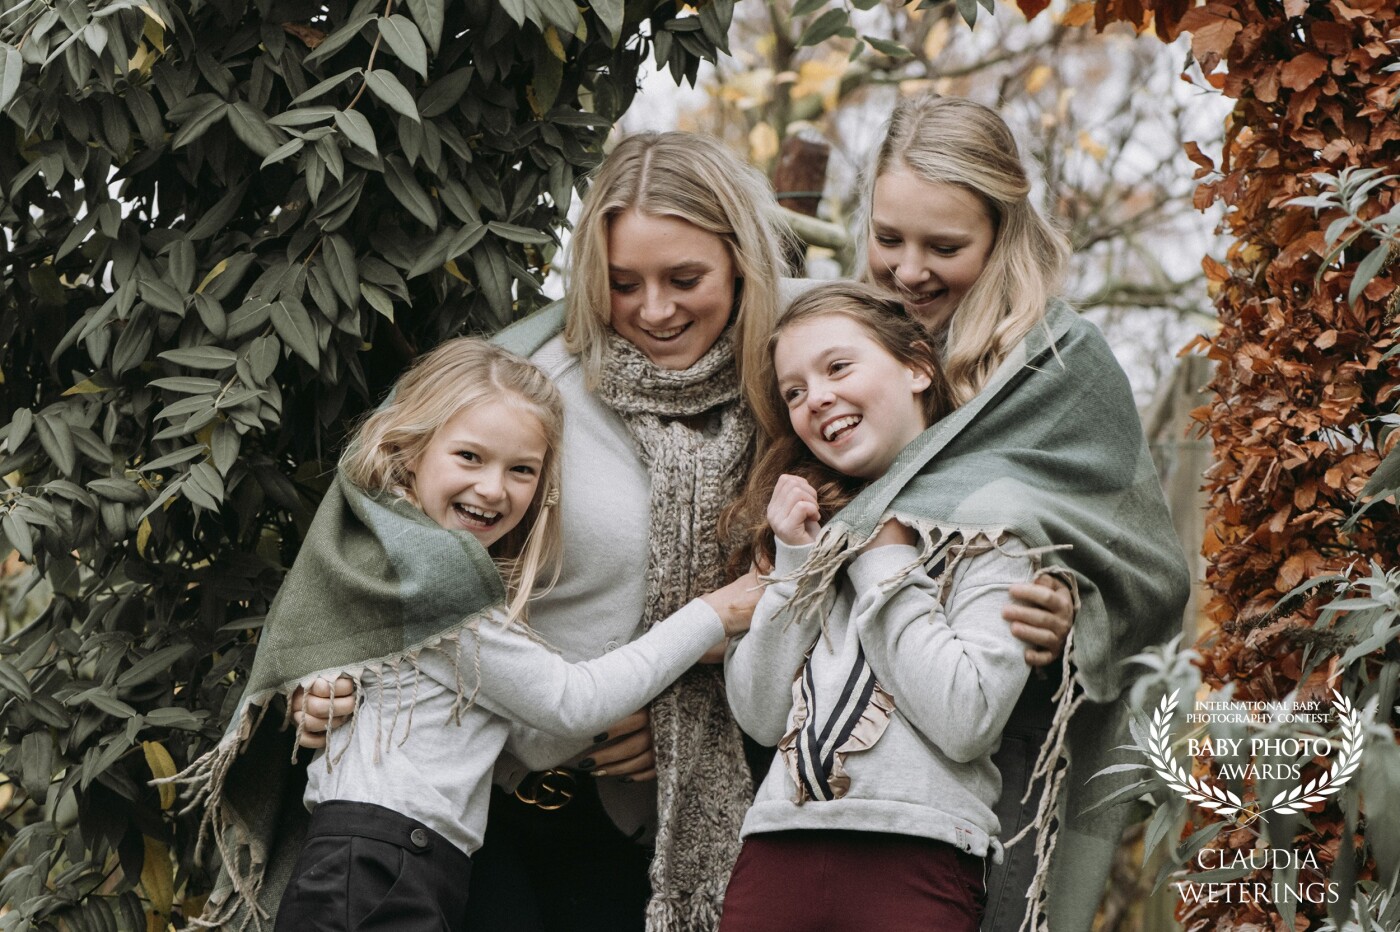 A lovely winter day with these sisters. Mother wanted a real life shoot and we had lots of fun making these pictures in their garden.